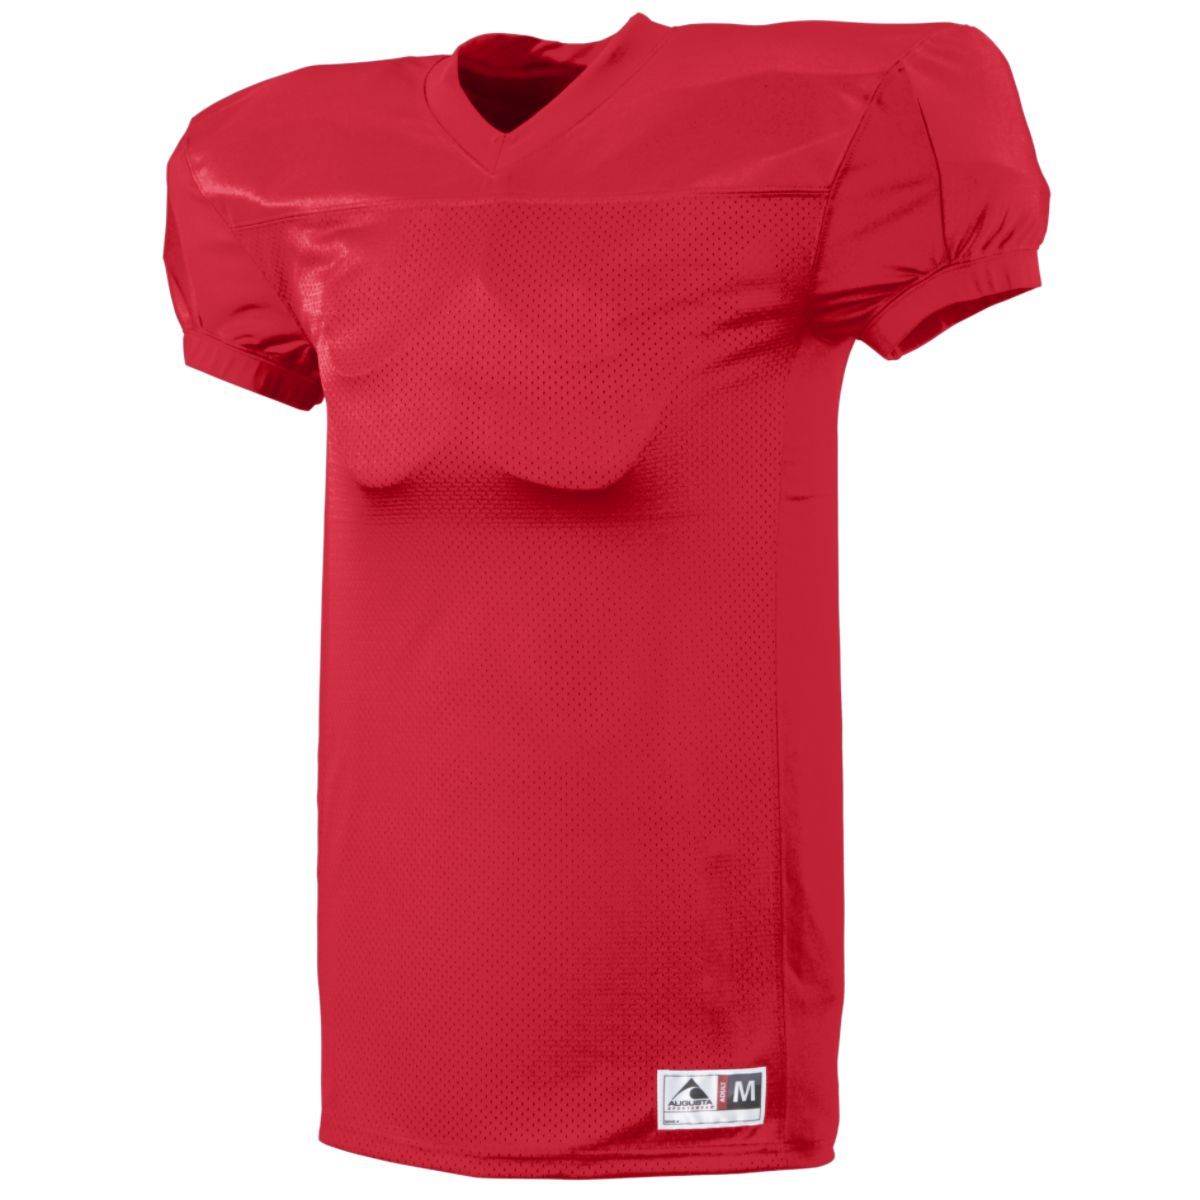 Augusta Sportswear Scrambler Jersey in Red  -Part of the Adult, Adult-Jersey, Augusta-Products, Football, Shirts, All-Sports, All-Sports-1 product lines at KanaleyCreations.com